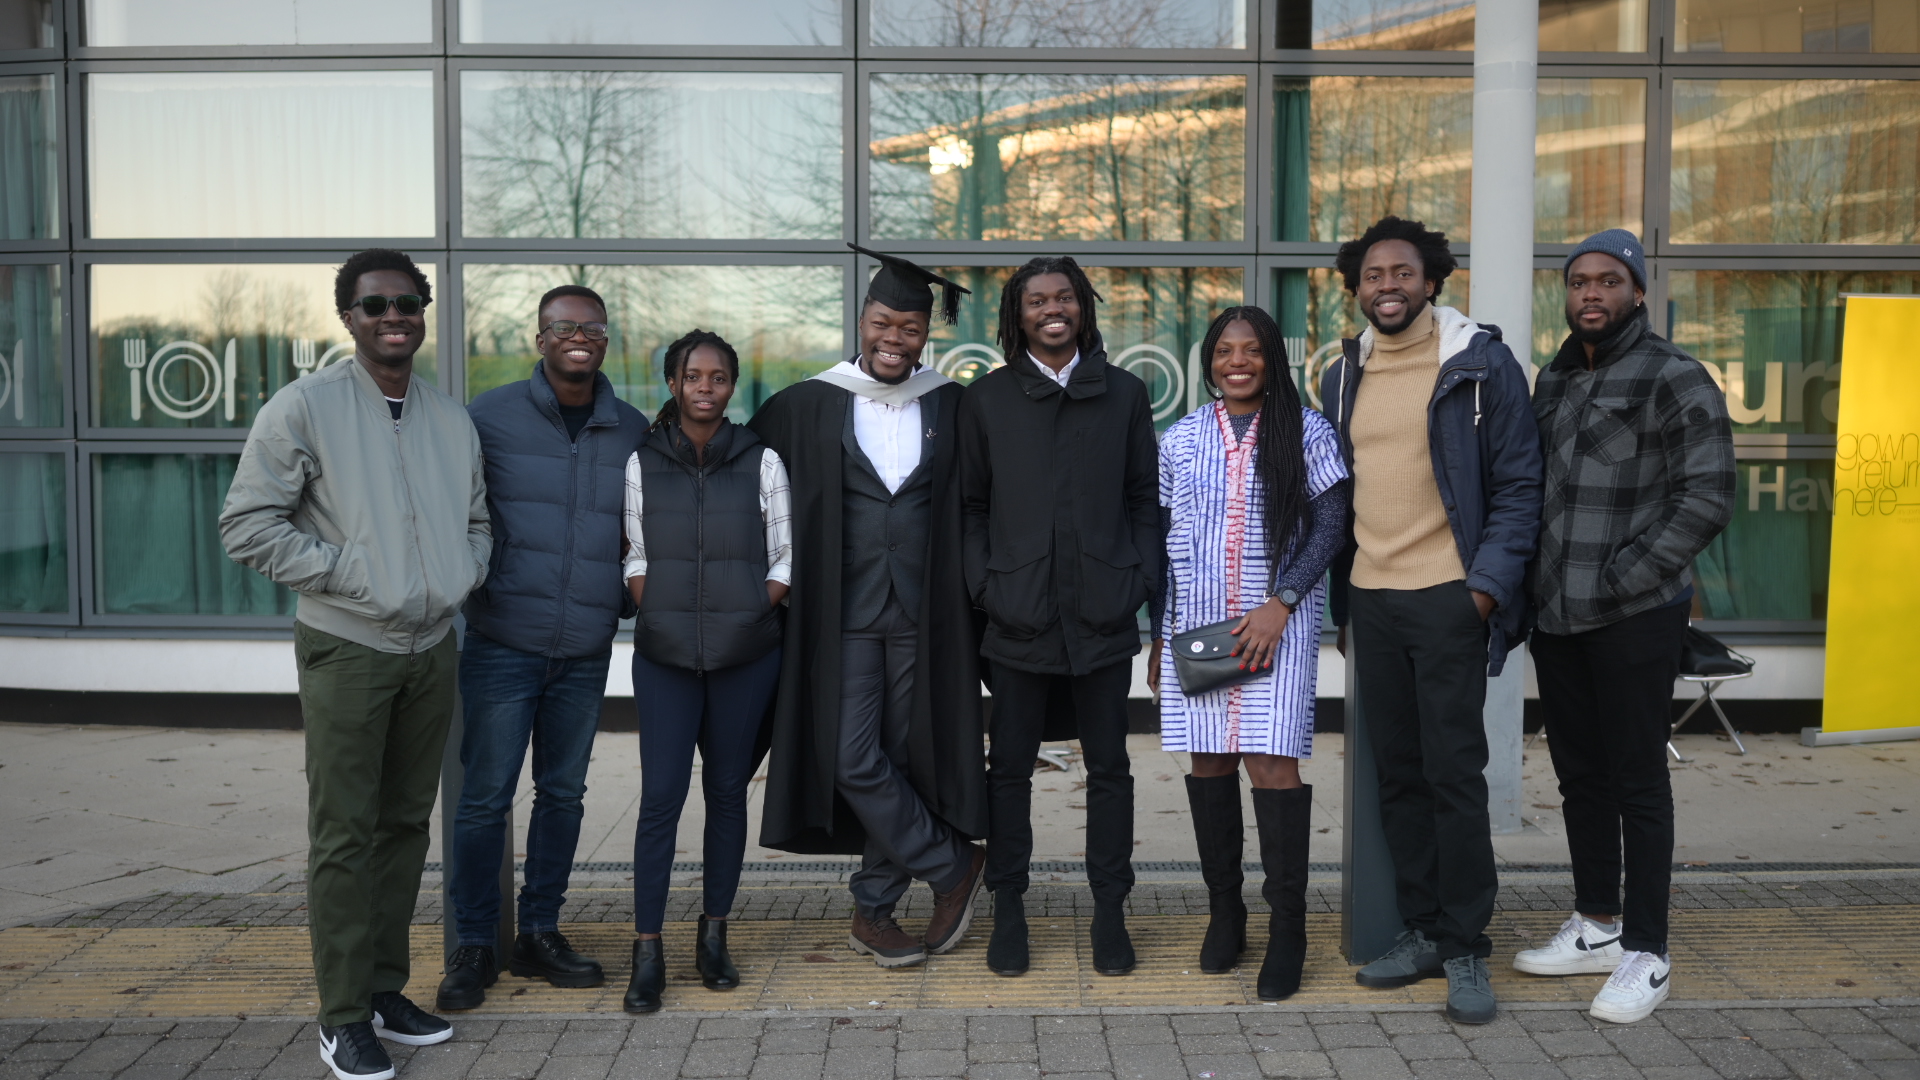 Jubilation as man graduates with 1st class from UK University after clinching 3rd class 10 years before in Nigeria [photos]